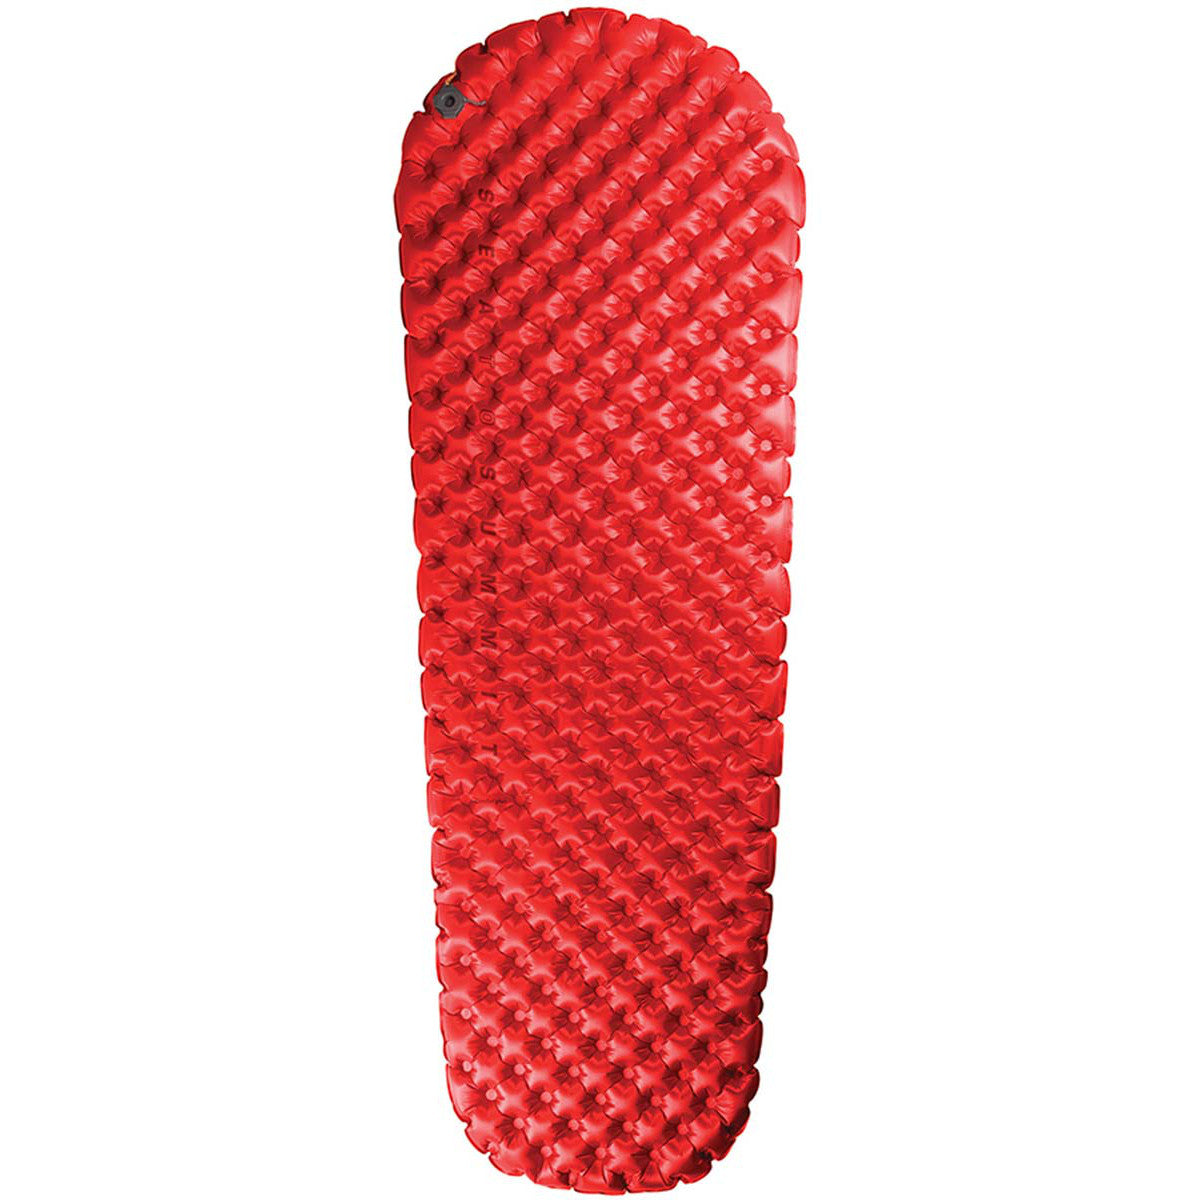 Sea to Summit Comfort Plus Insulated sleeping mat, shown inflated and laid flat in red colour